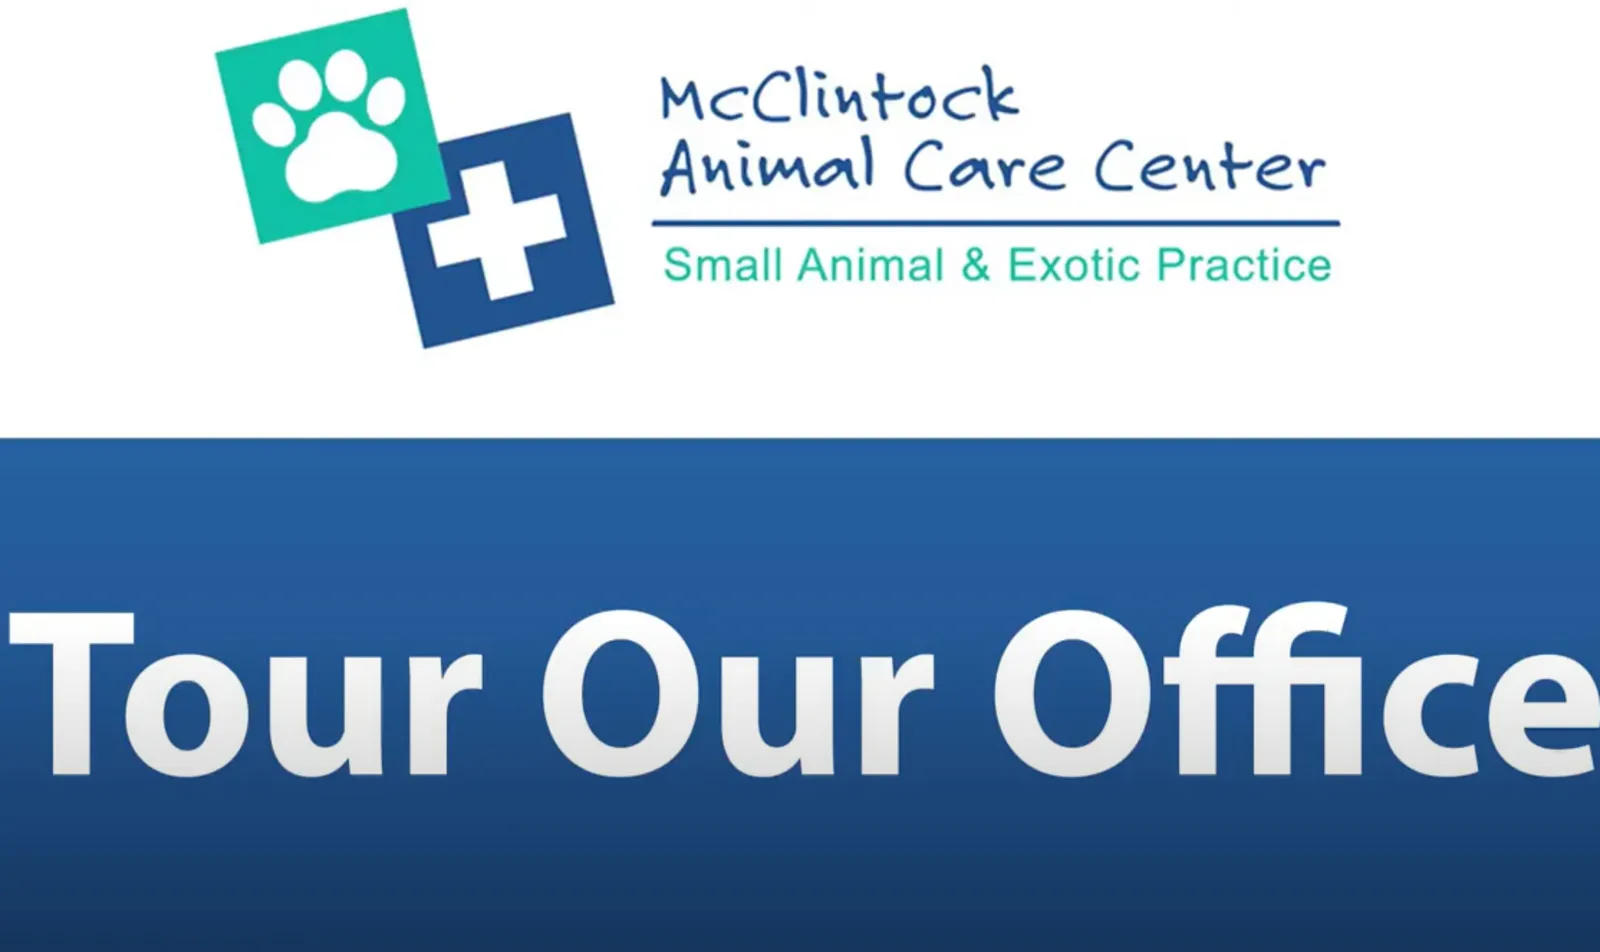 Tour our Office of McClintock Animal Care Center